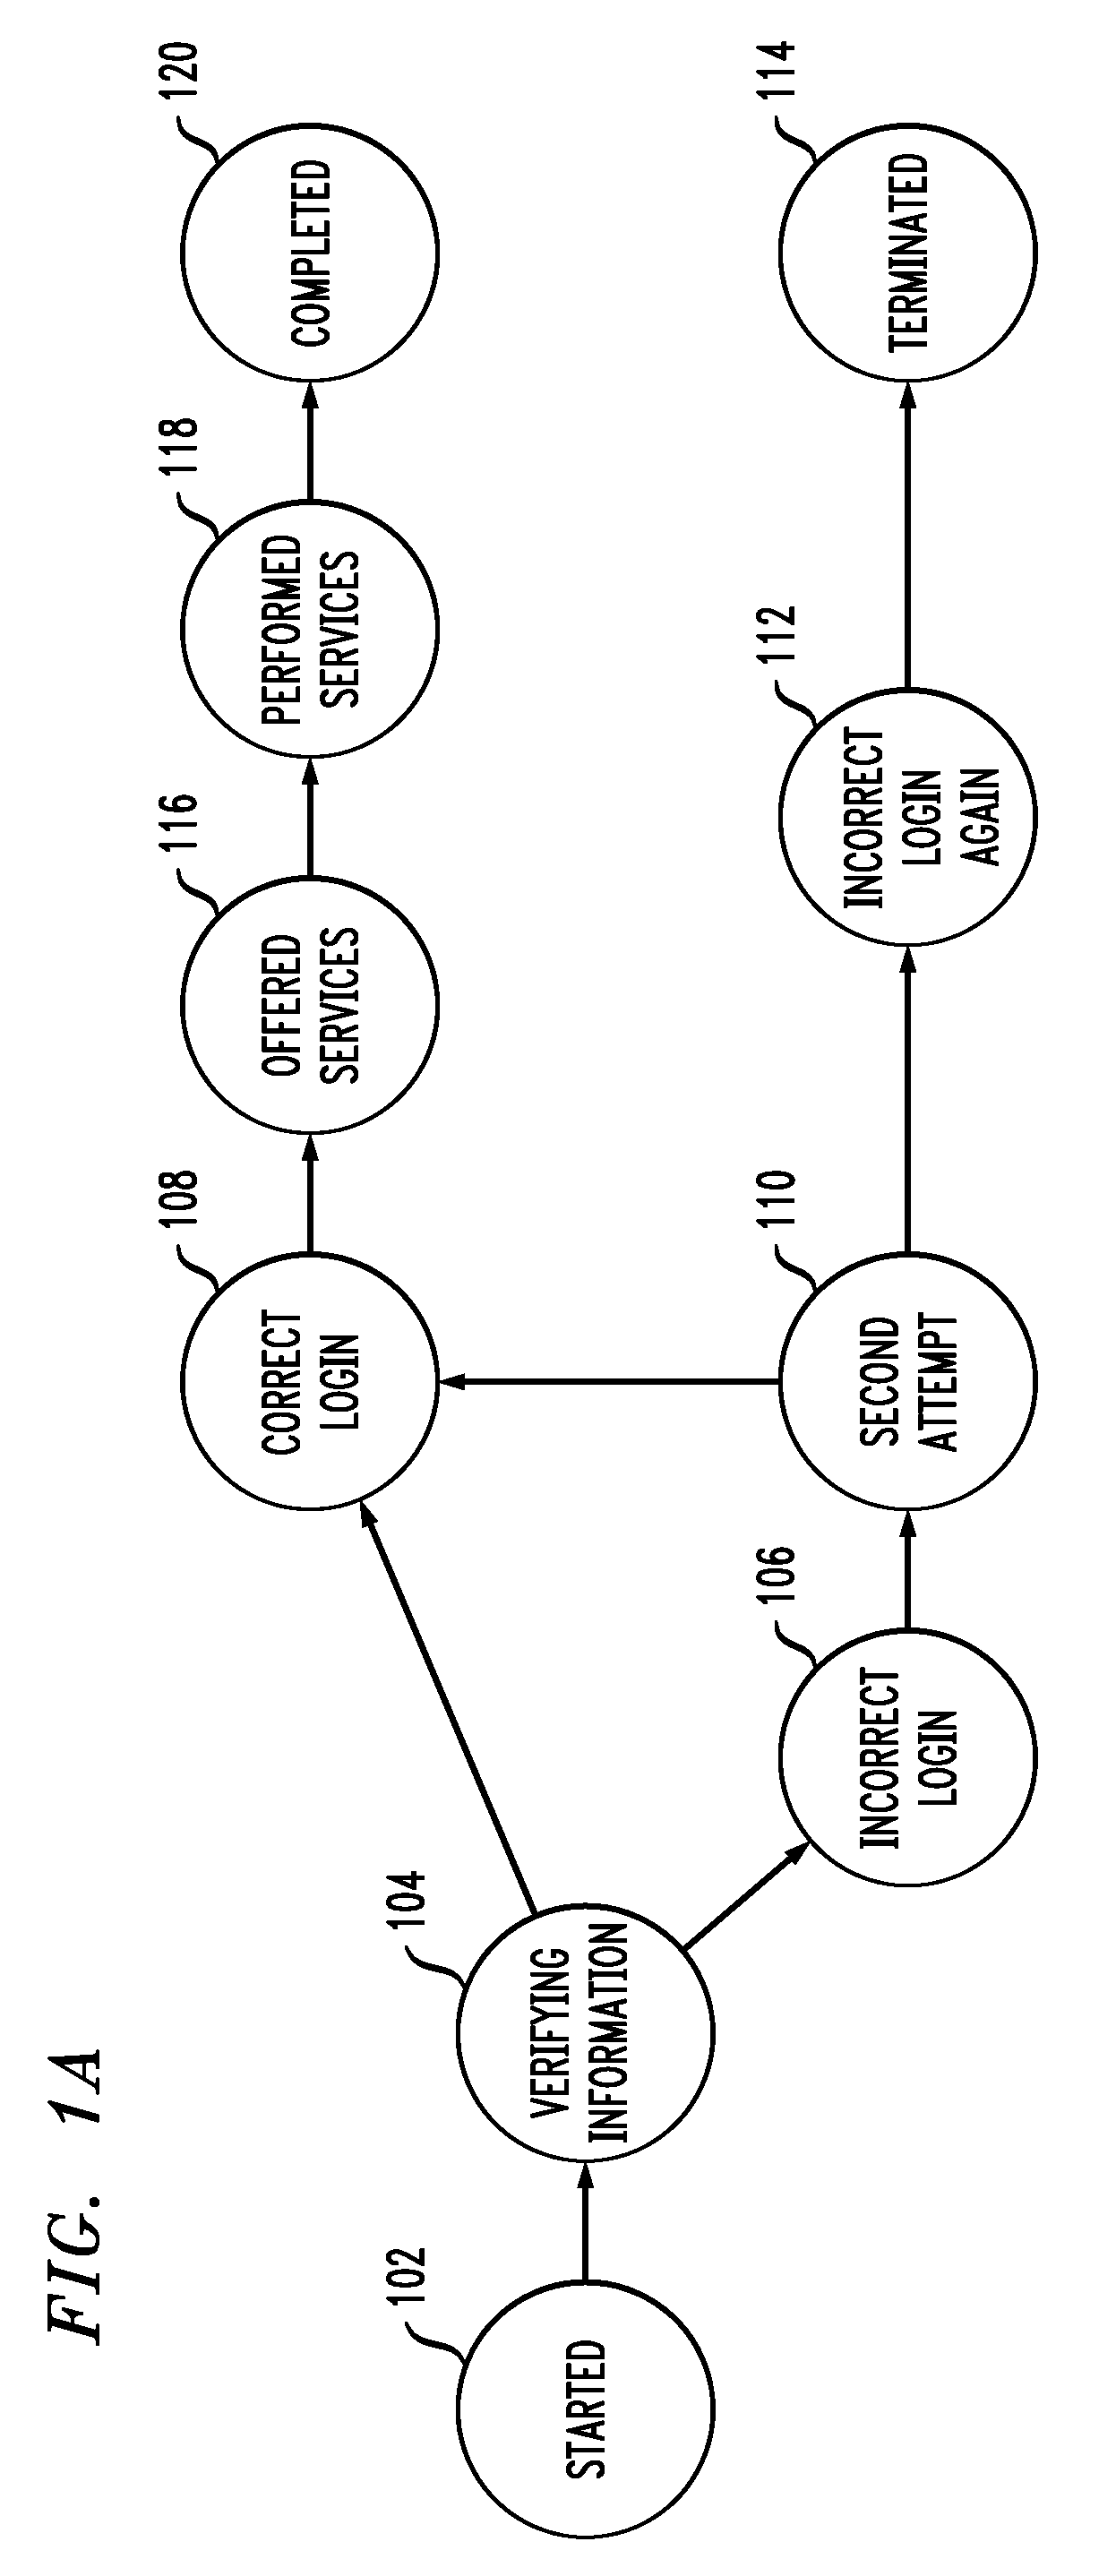 Method using footprints in system log files for monitoring transaction instances in real-time network